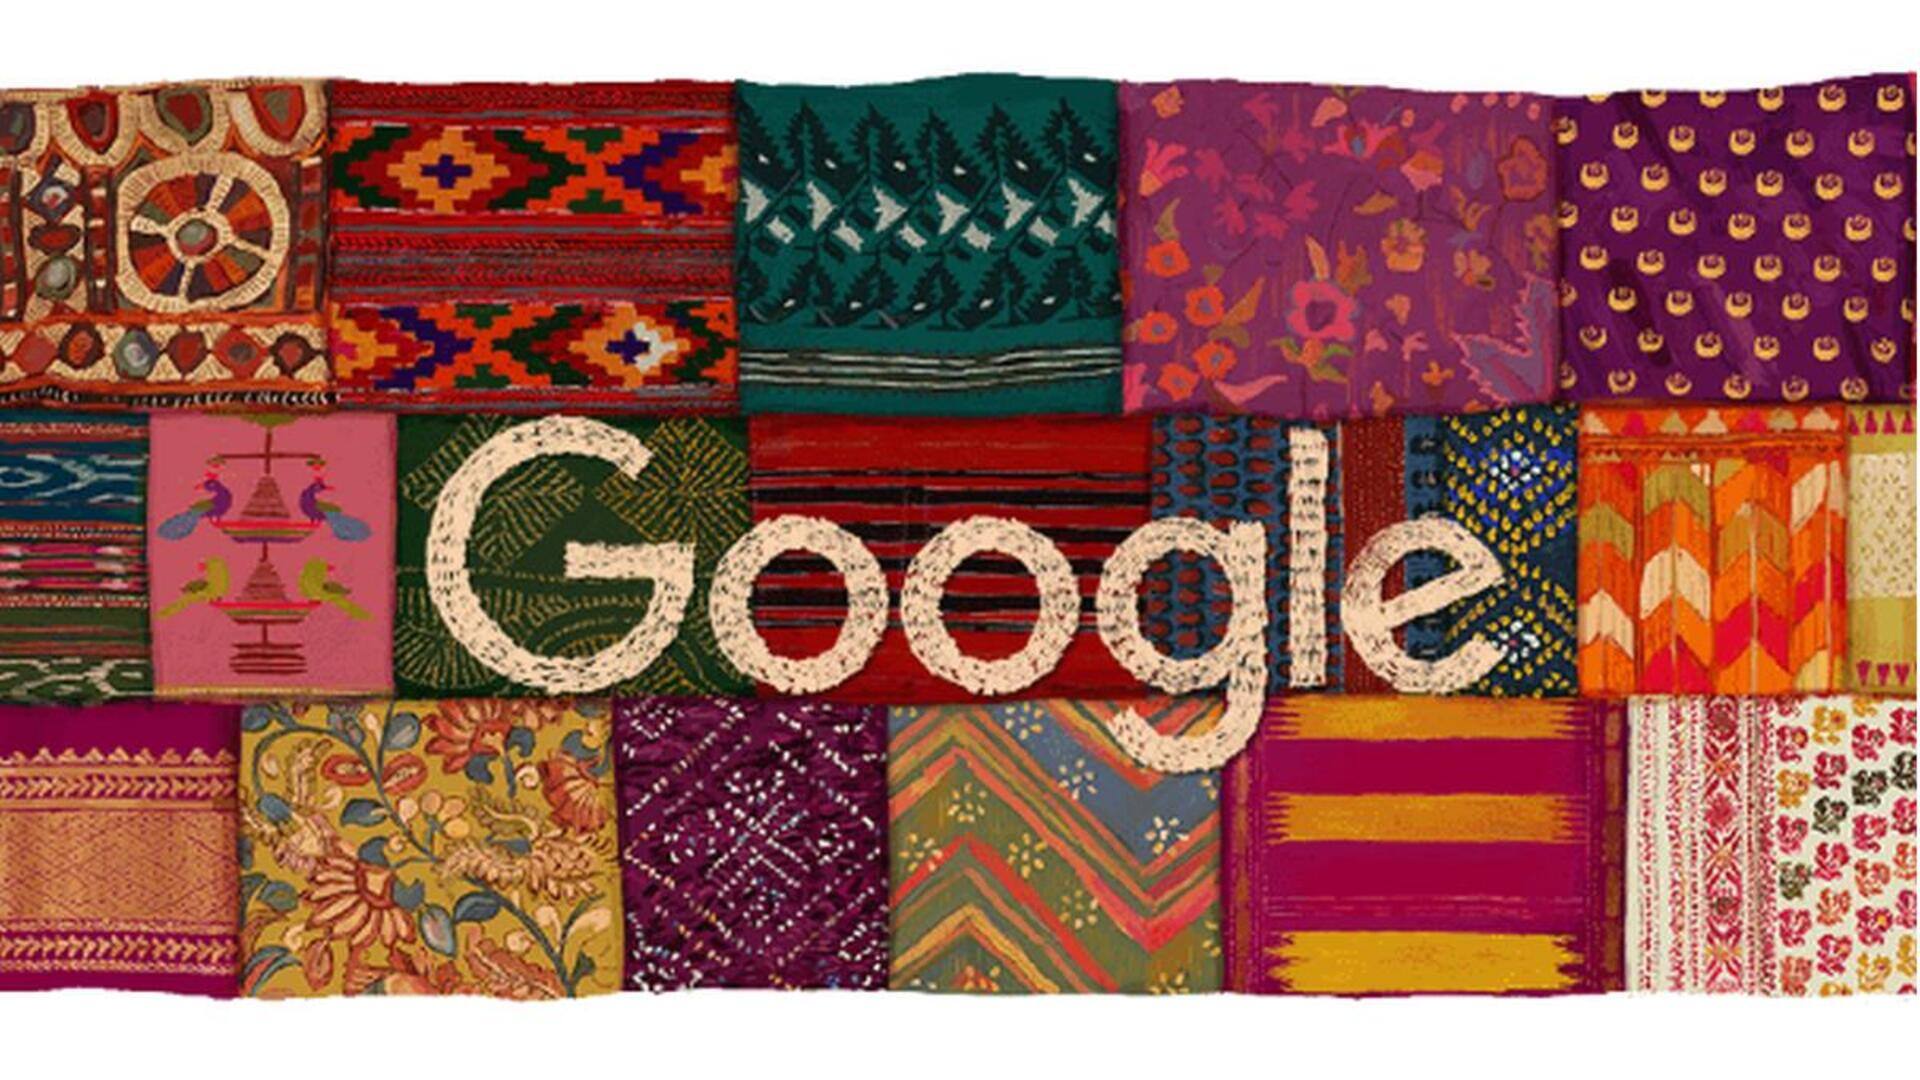 Independence Day: Google Doodle celebrates India's rich legacy of textiles